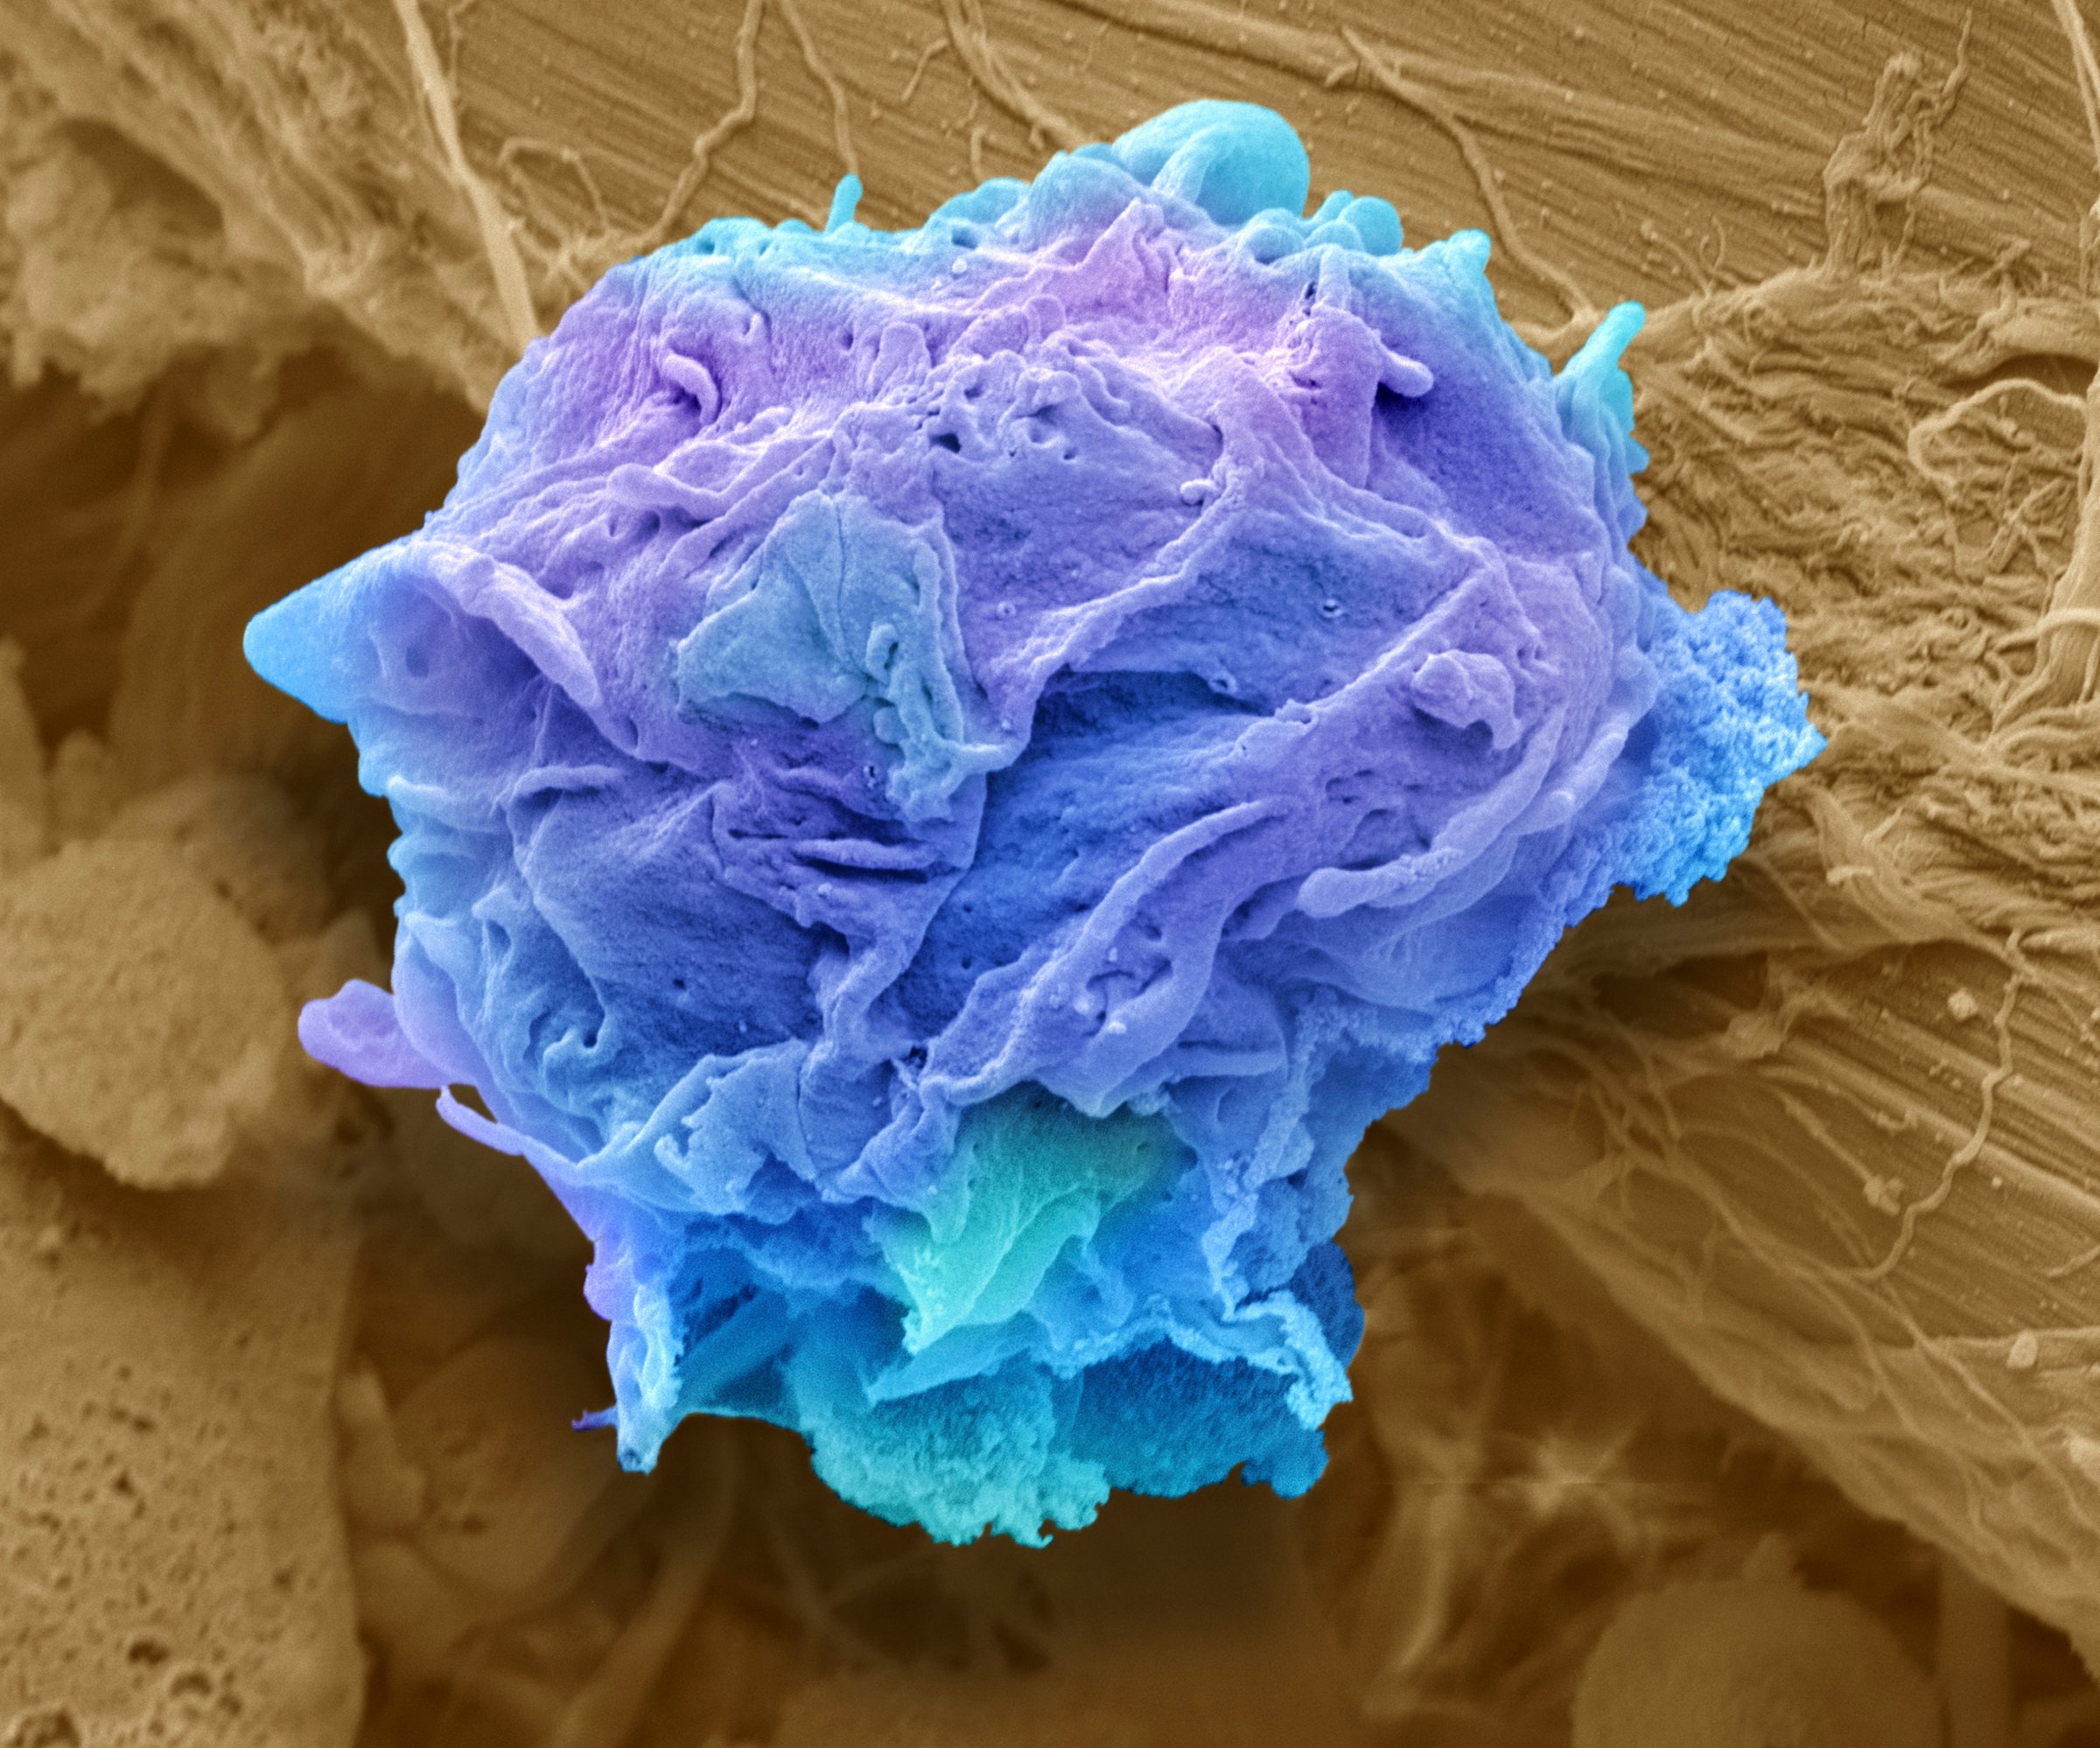 Lymphoma cancer cell. Coloured scanning electron micrograph (SEM) of a lymphoma cell. A lymphoma is a cell of the immune system that has become cancerous. The cell becomes immortal and can grow indefinitely. A number of these cells will form a tumour. Lymphomas most commonly occur in the lymph nodes and spleen, which are rich in tissue containing lymphocytes, and can spread to the liver and bone marrow. Lymphoma cancers are classified into either Hodgkin's lymphoma (presence of Reed-Sternberg cells) or non- Hodgkin's lymphoma. Treatment is with chemotherapy and radiation therapy and is often successful. Magnification: x9000 when printed at 10 centimetres high.